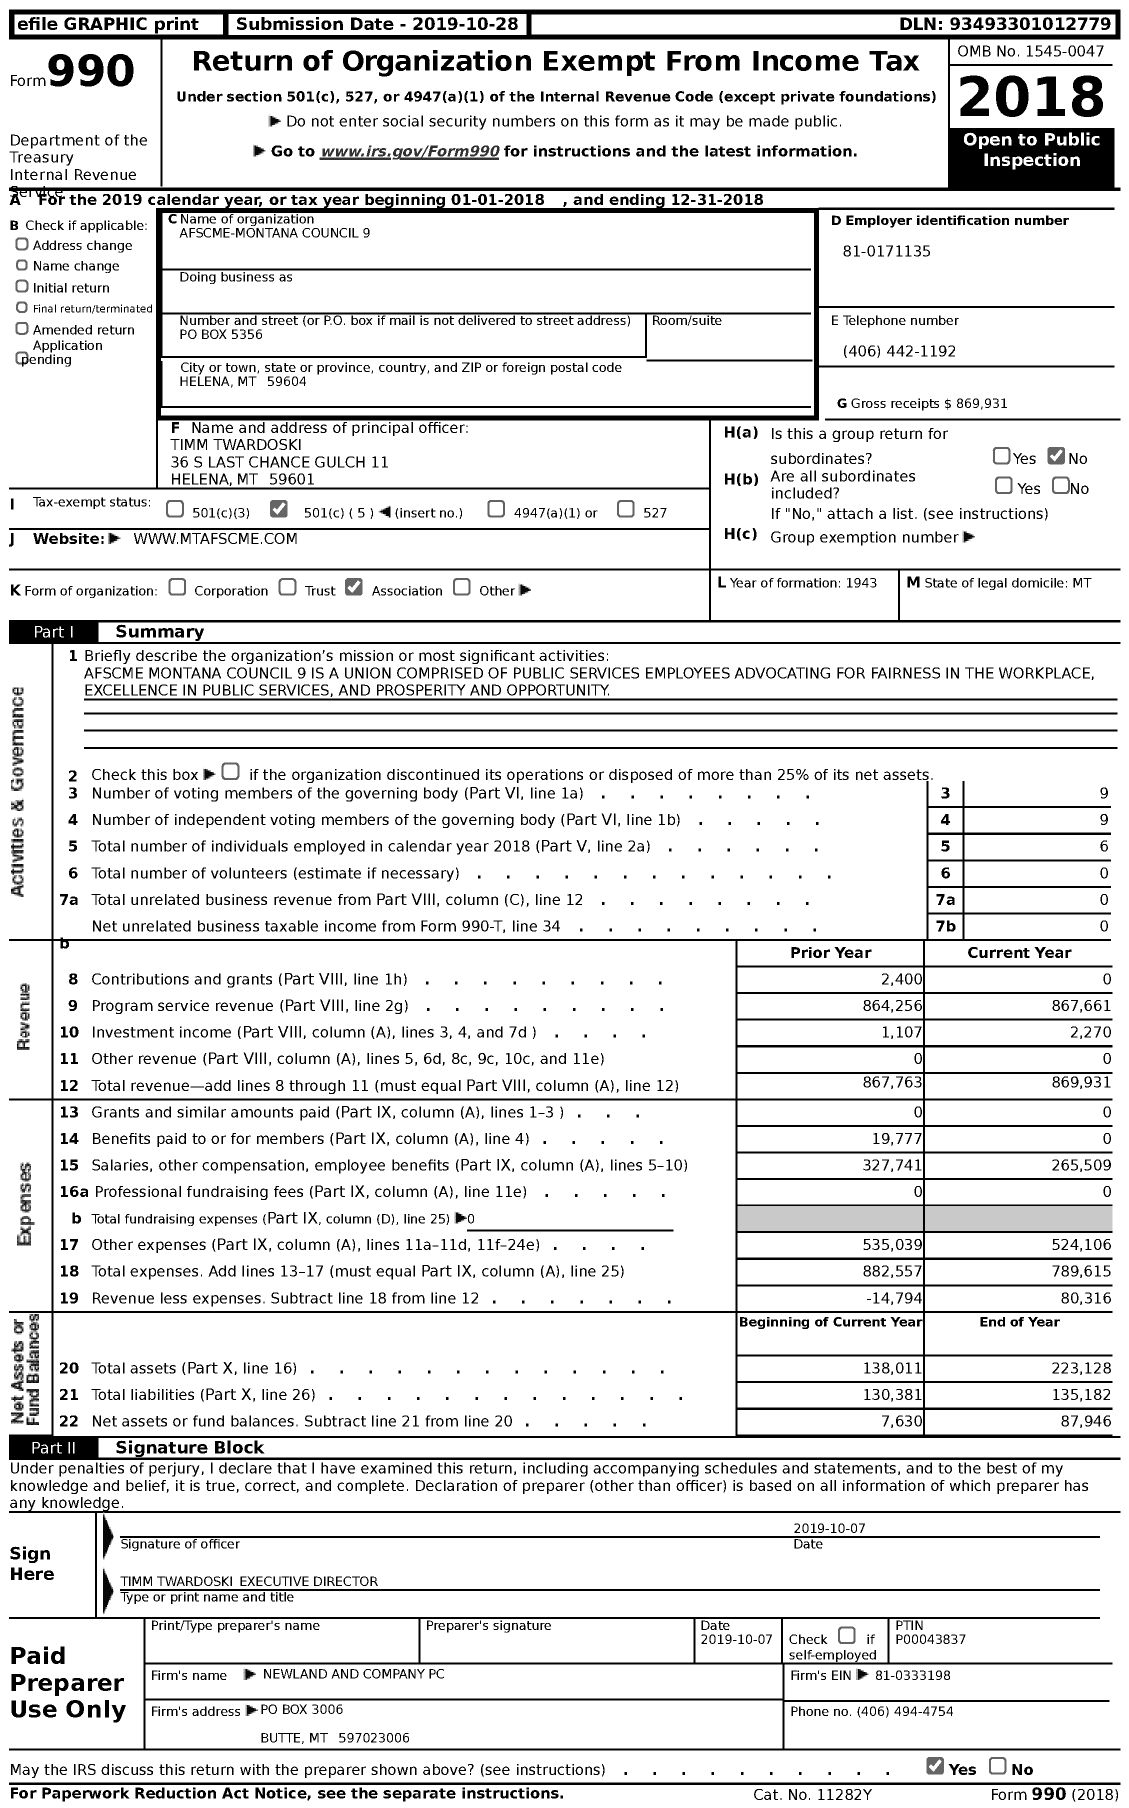 Image of first page of 2018 Form 990 for American Federation of State County & Municipal Employees - C0009MT Montana State Council 9